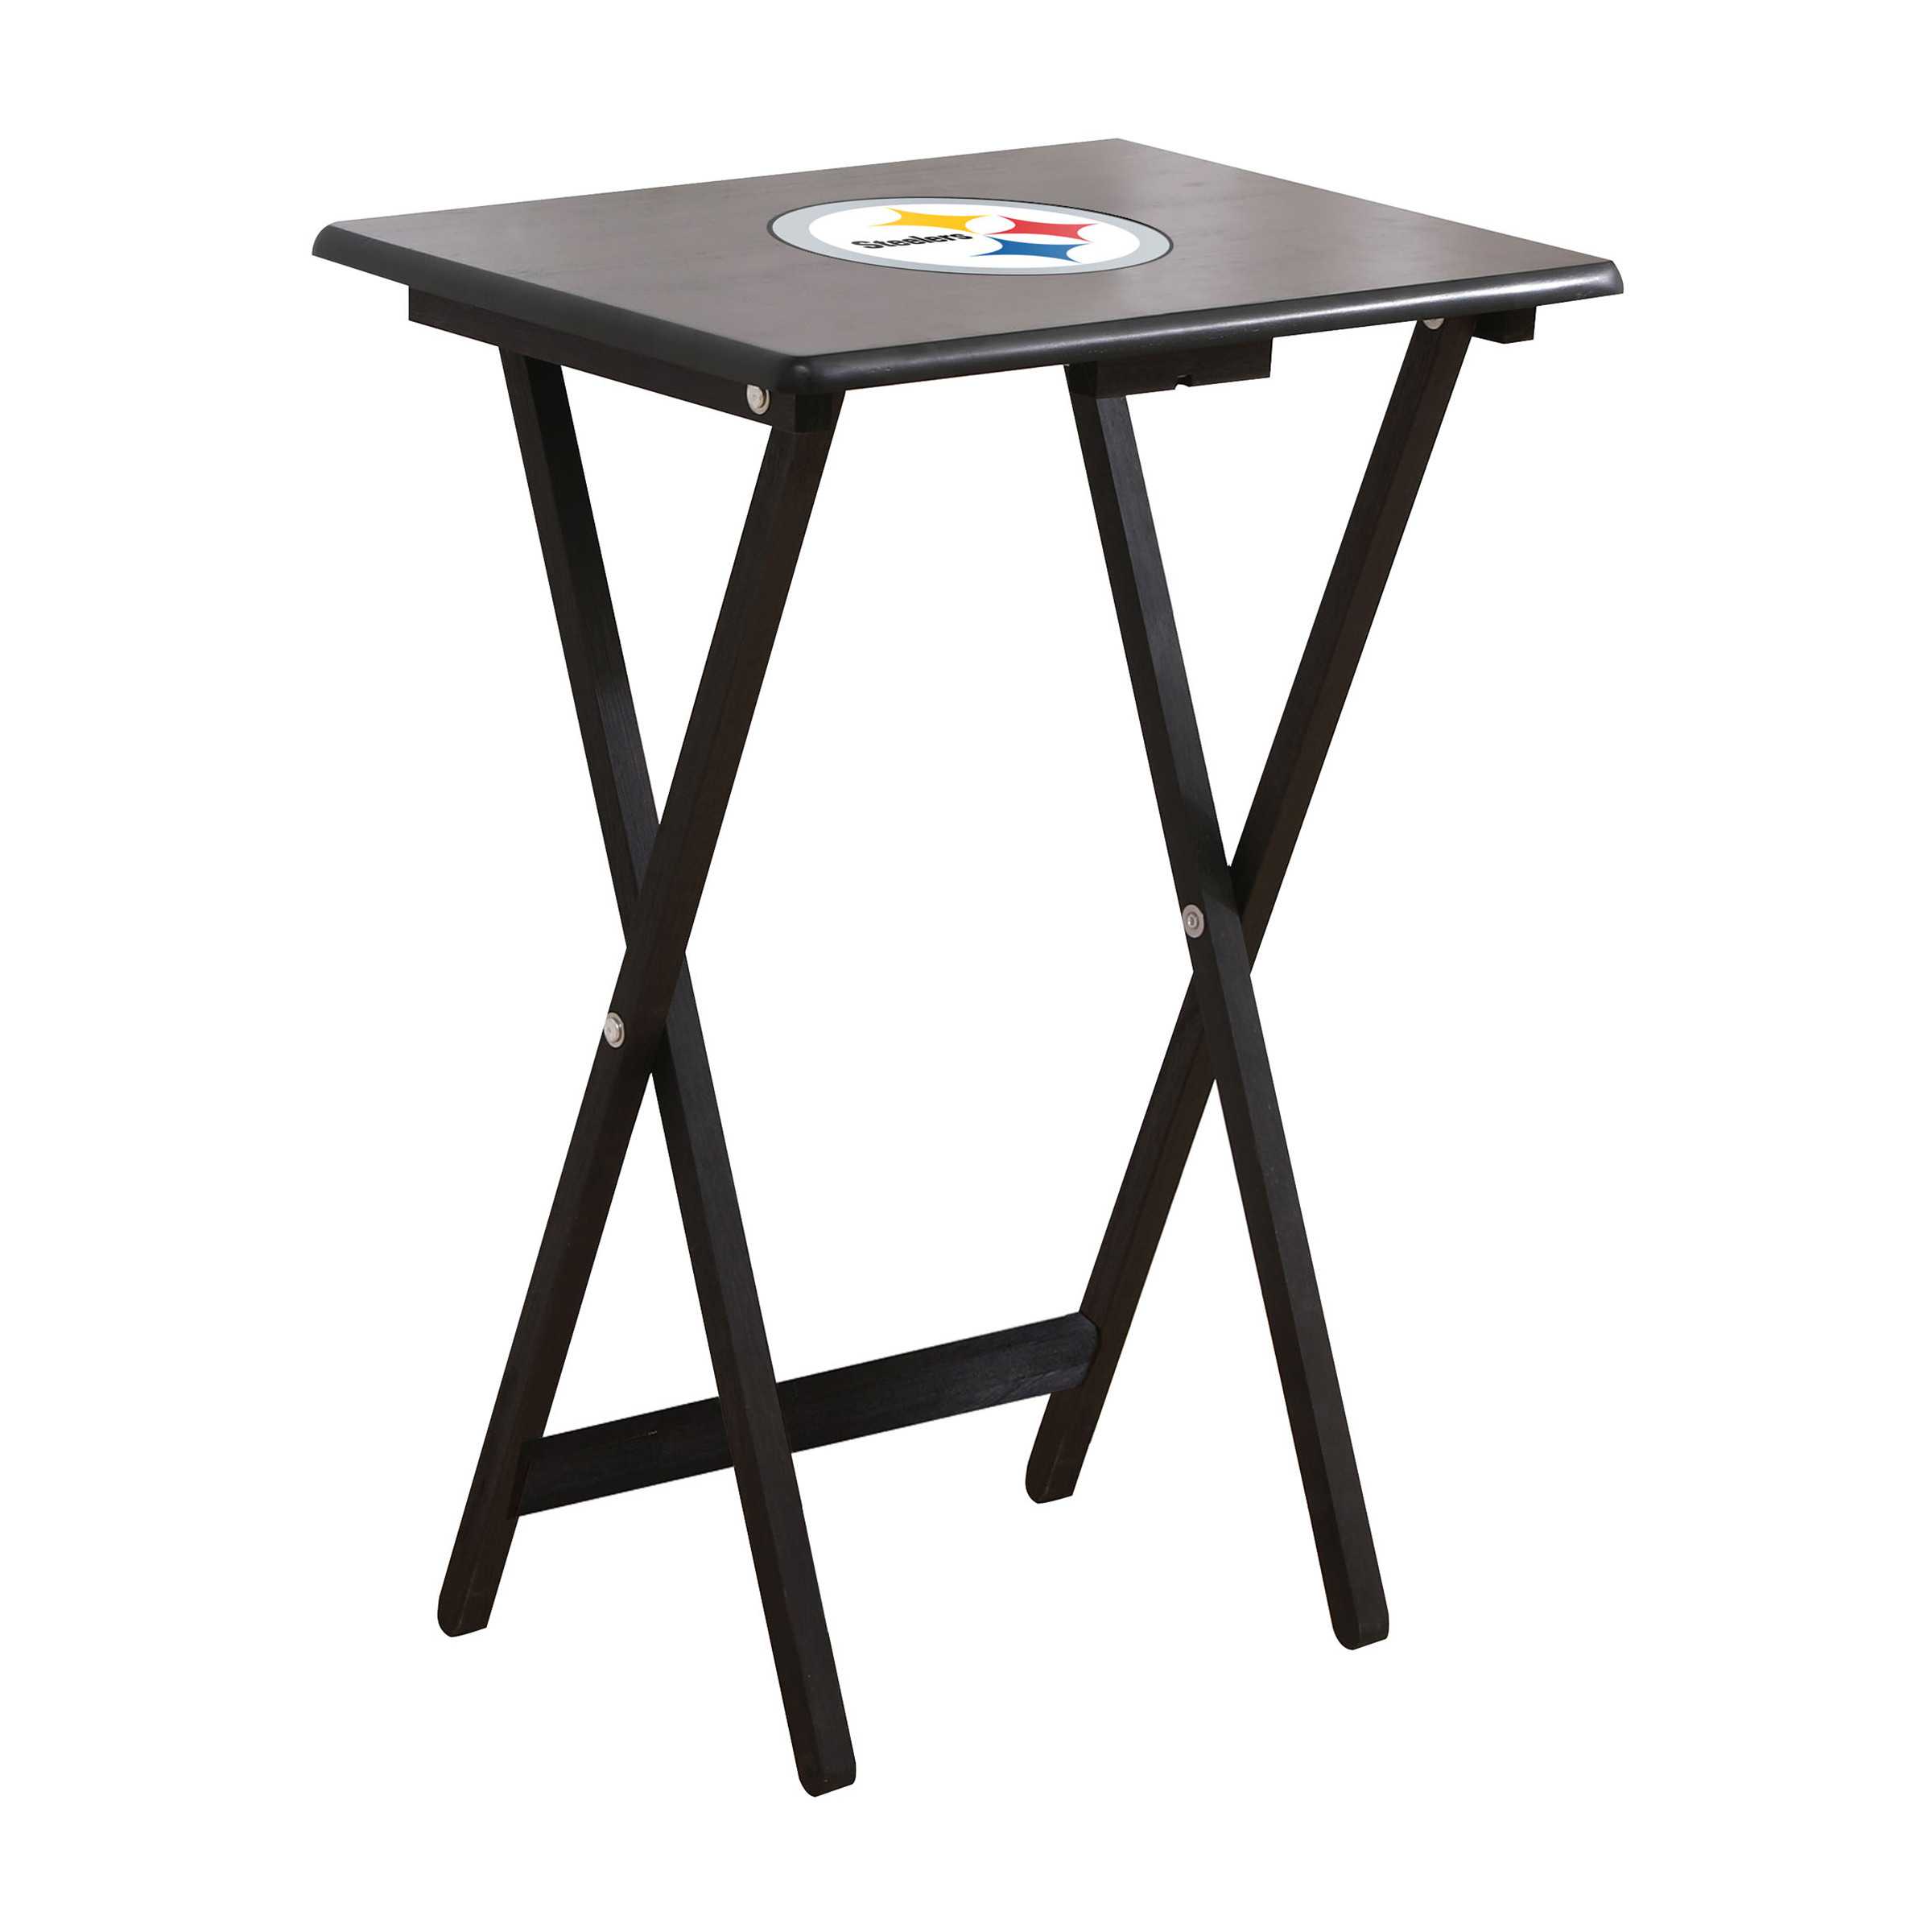 PITTSBURGH STEELERS 4 TV TRAYS WITH STAND